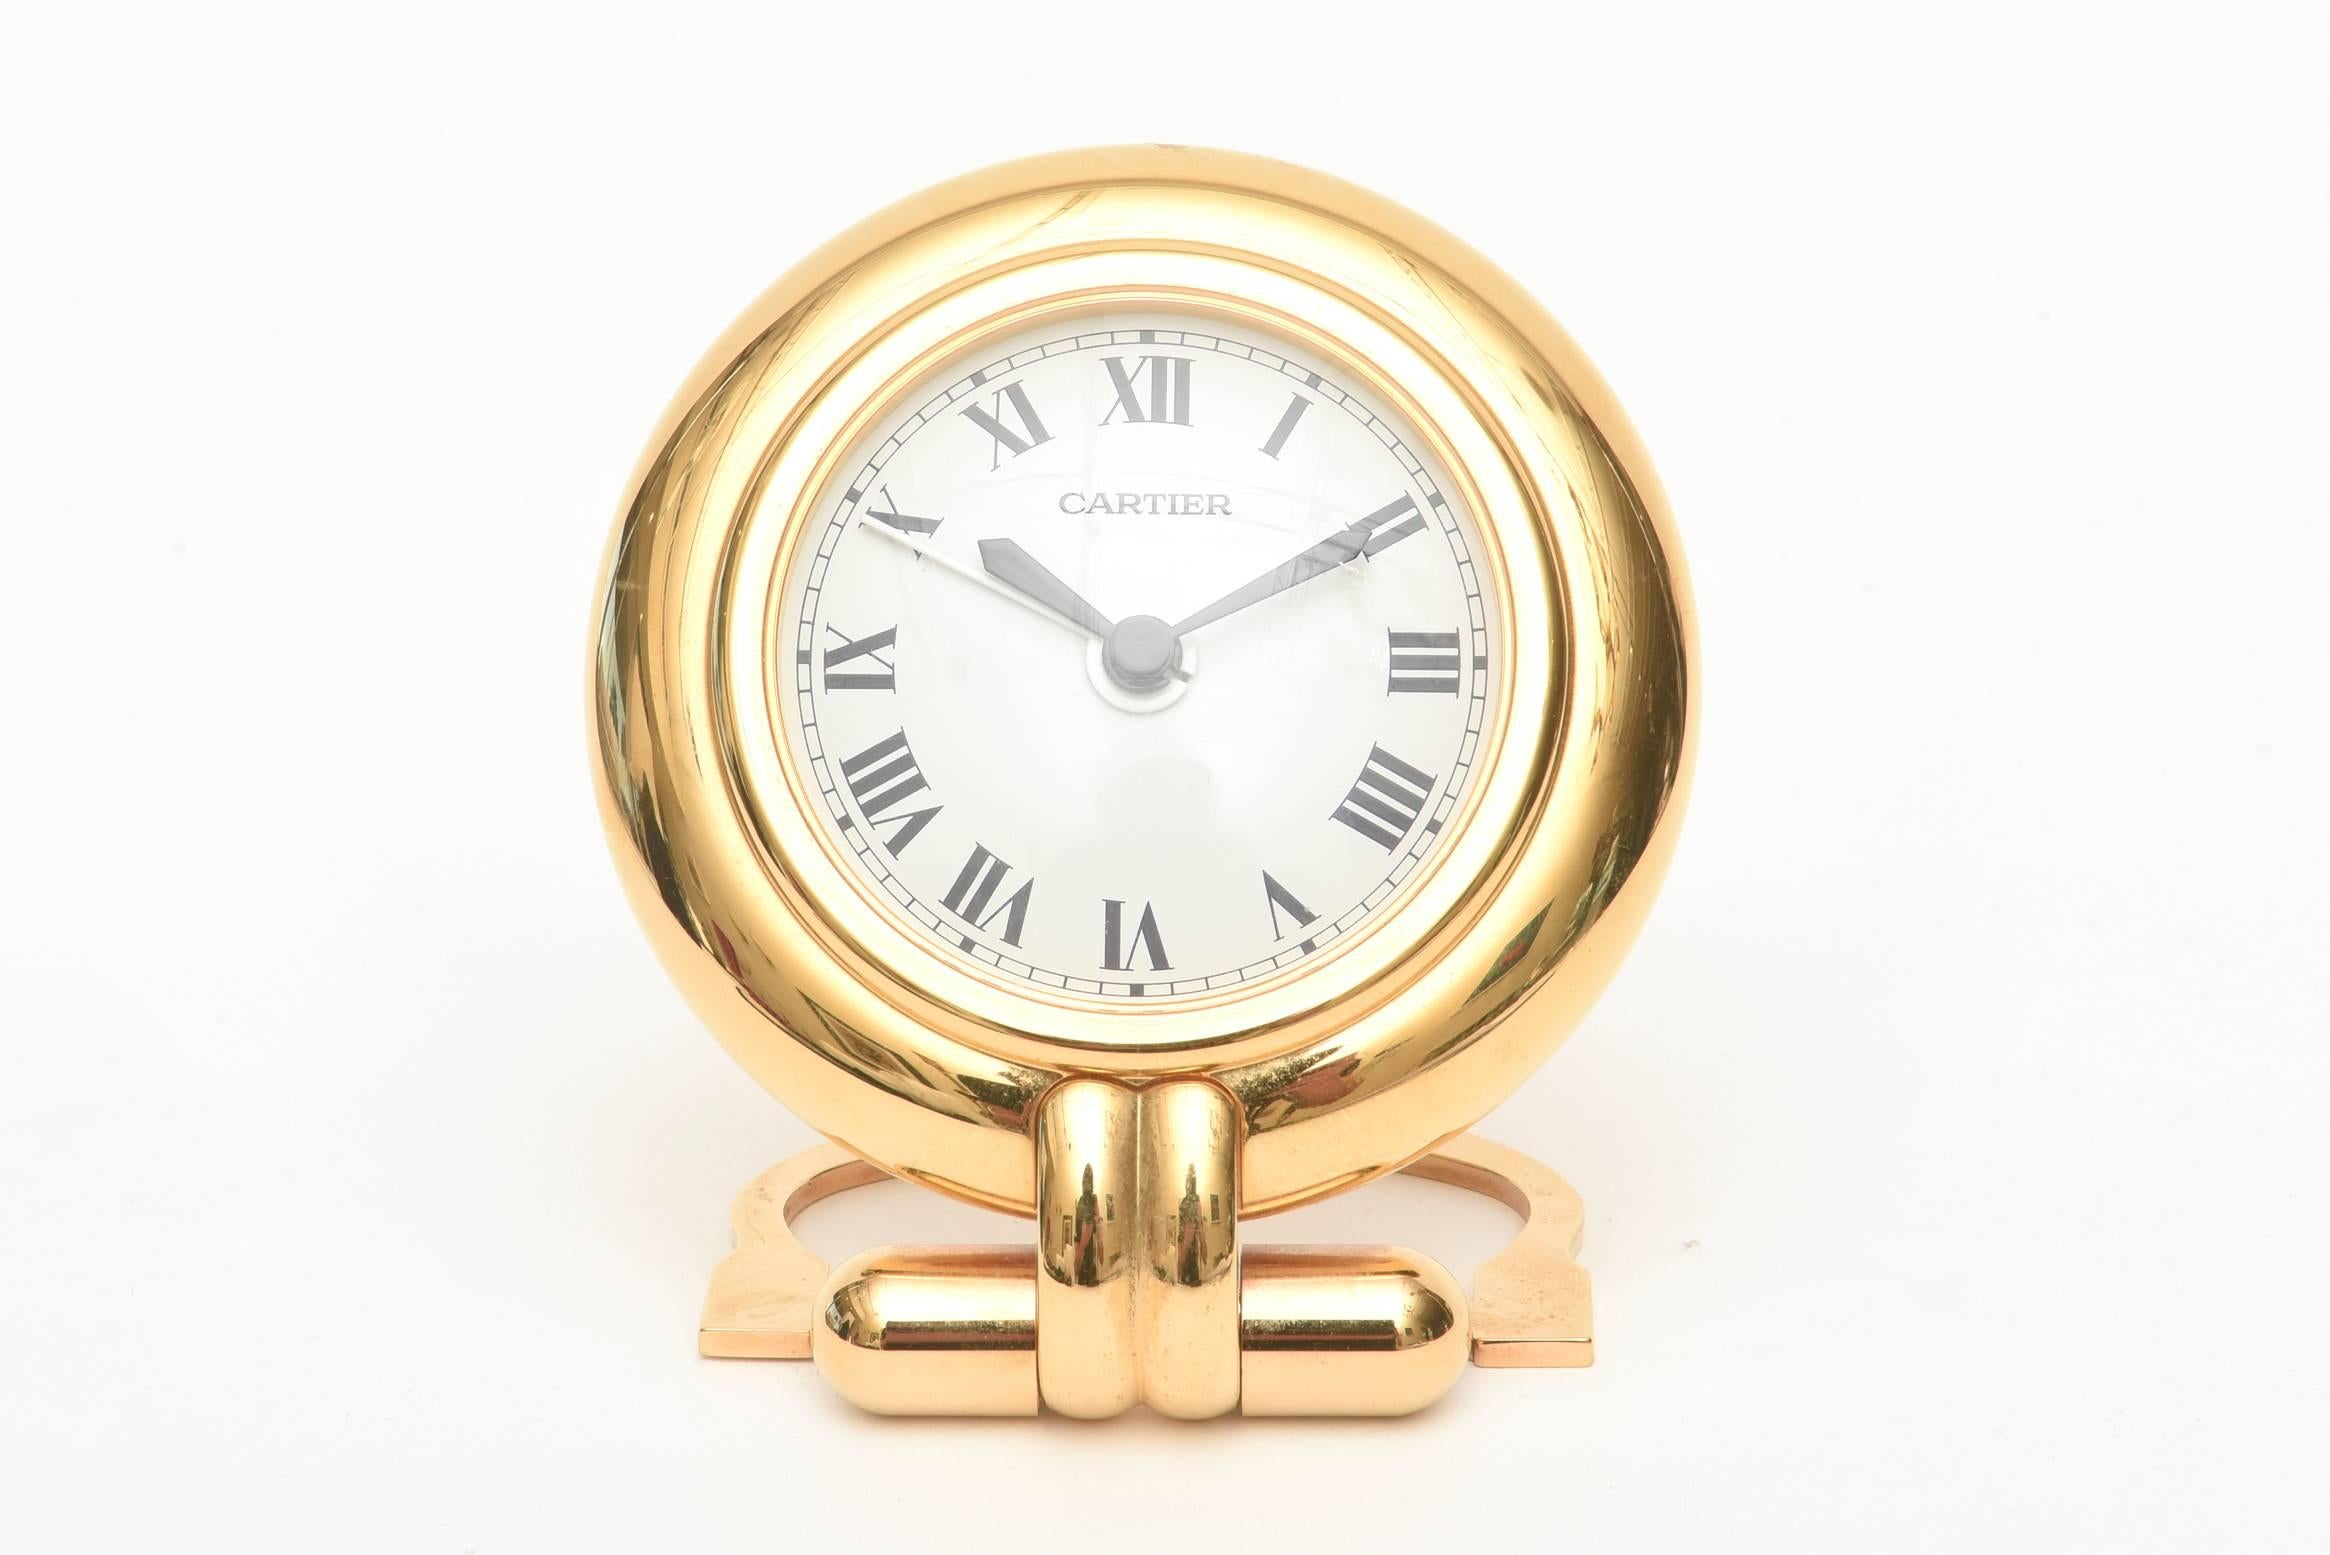 This stunning and elegant vintage Cartier quartz desk, travel or nightstand small fold up Roman numeral clock has its original box, certificate and papers. It is called the Colisee Clock collection and is 24 karat gold plated. It folds up for